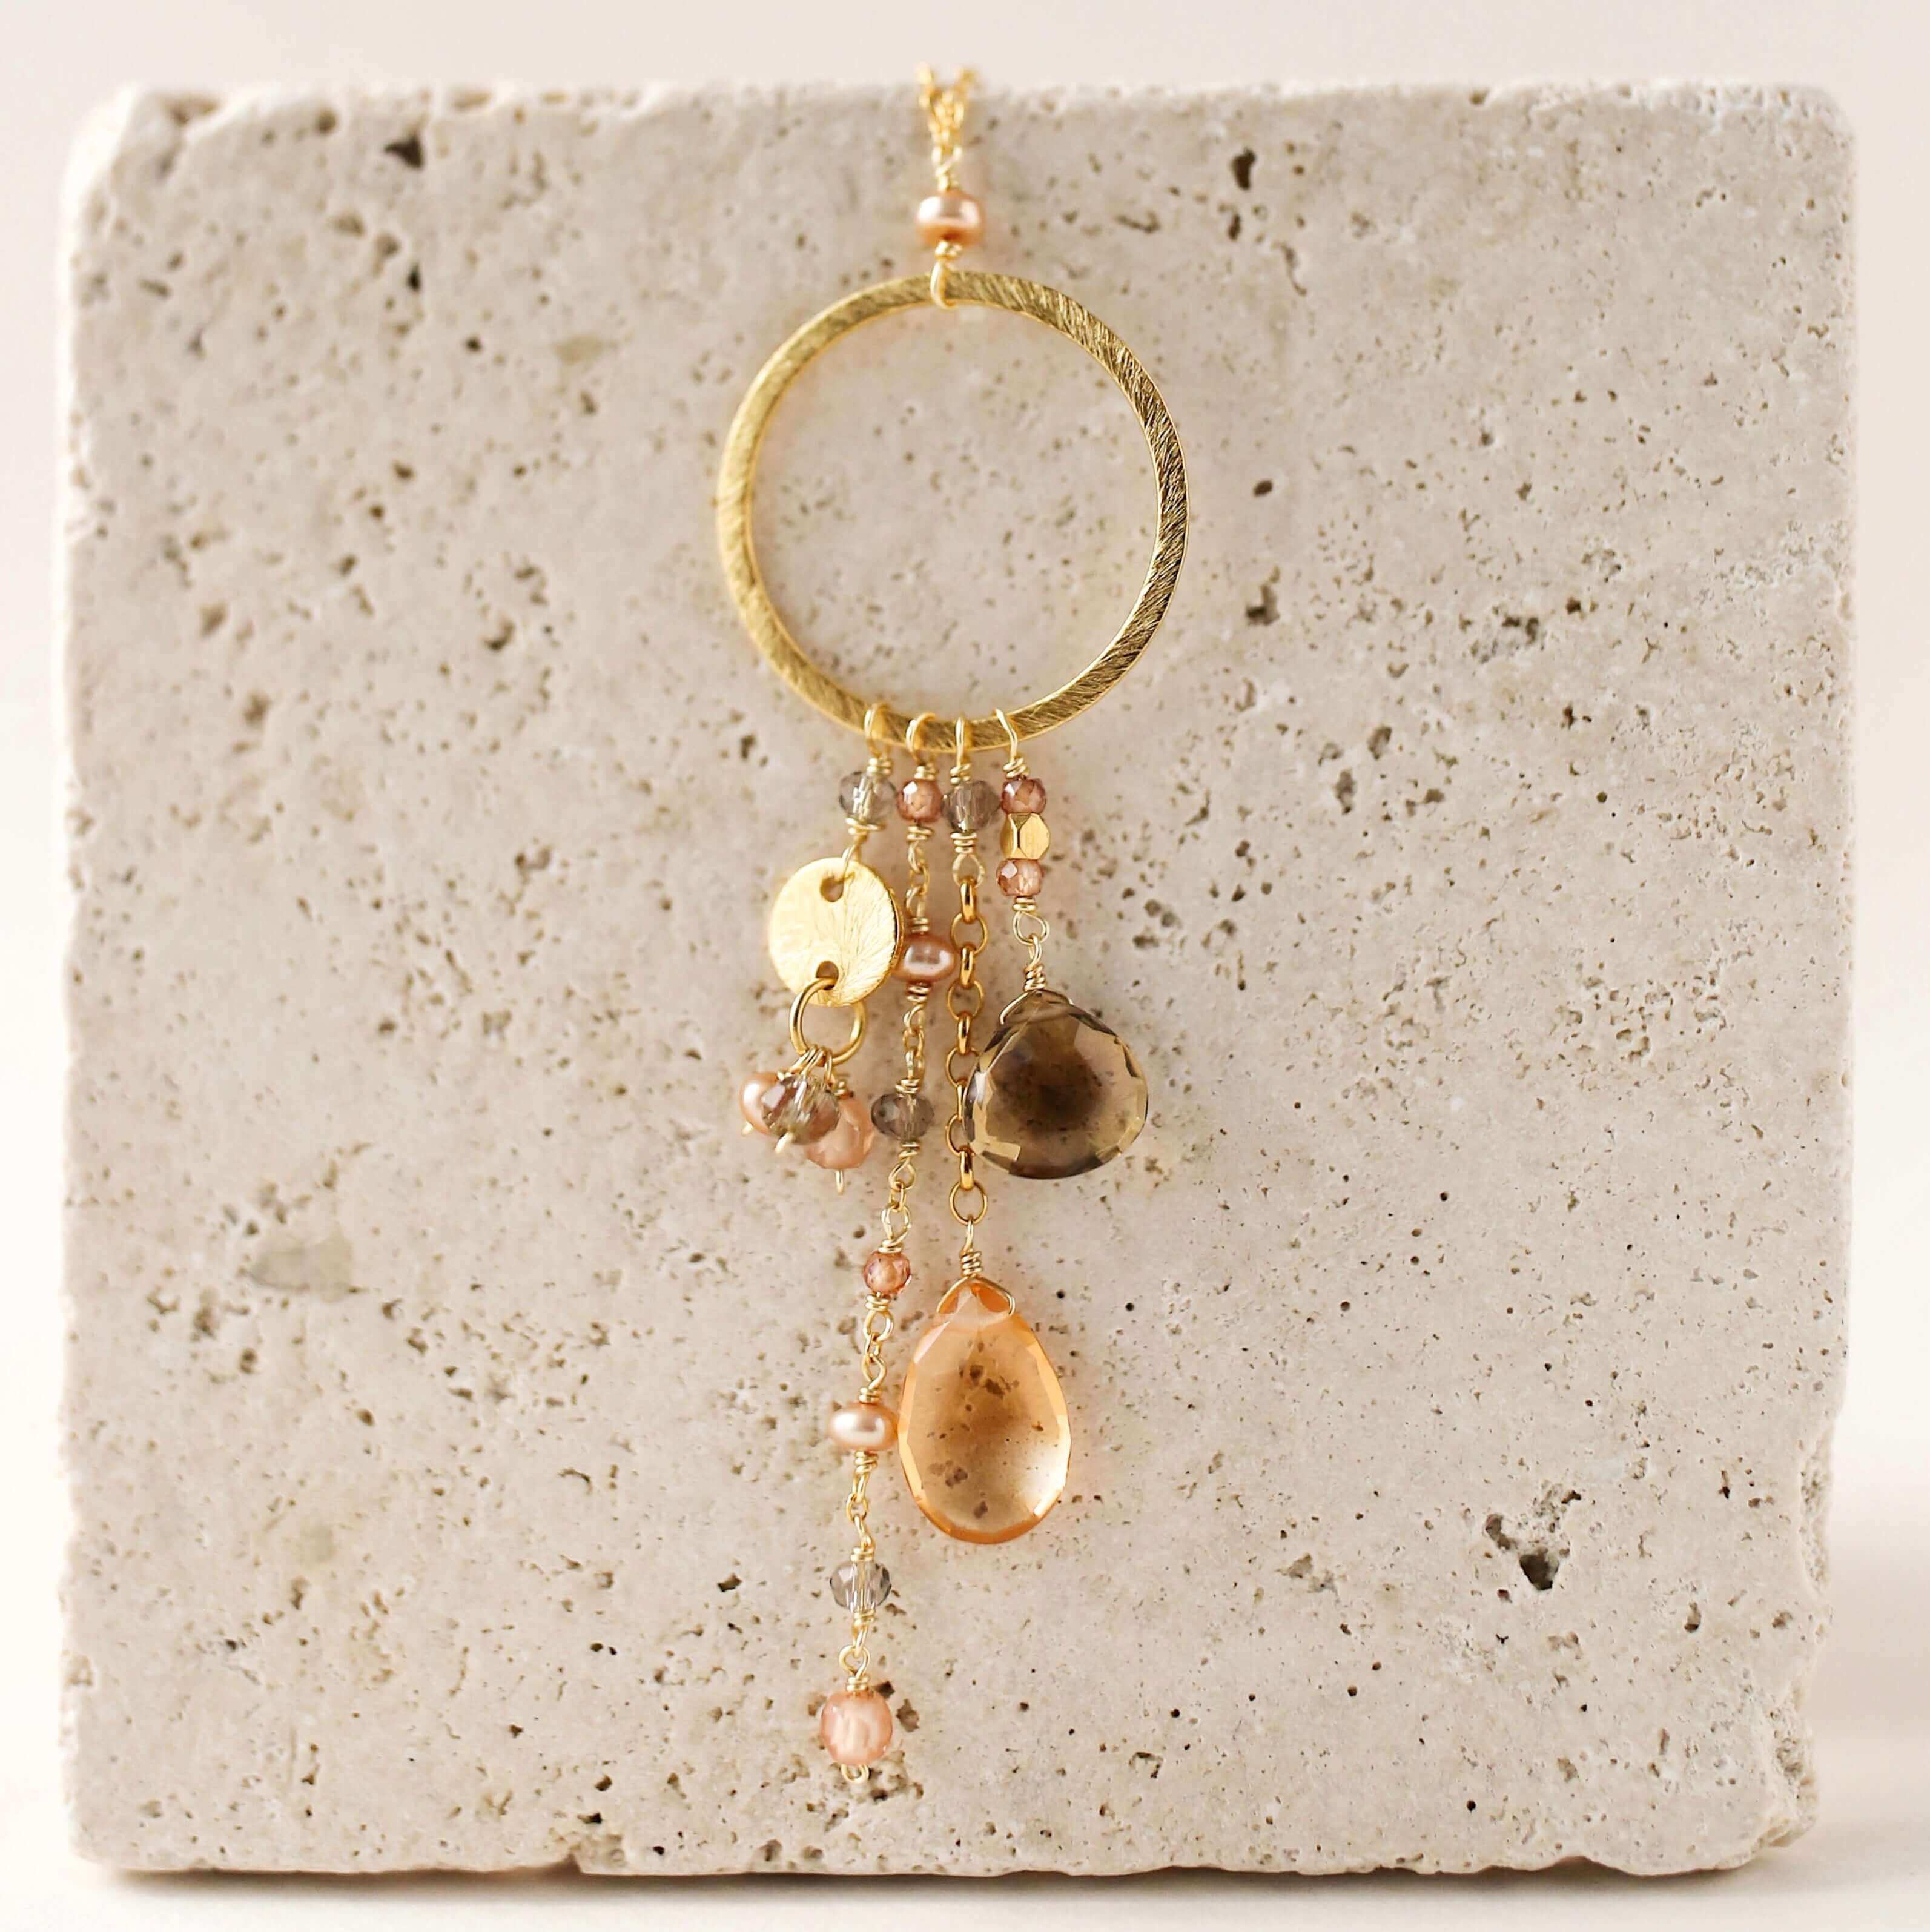 Multiple strands of lush gems sparkle on a hoop with citrine and smoky quartzt Gemstone Pendant Gold Necklace